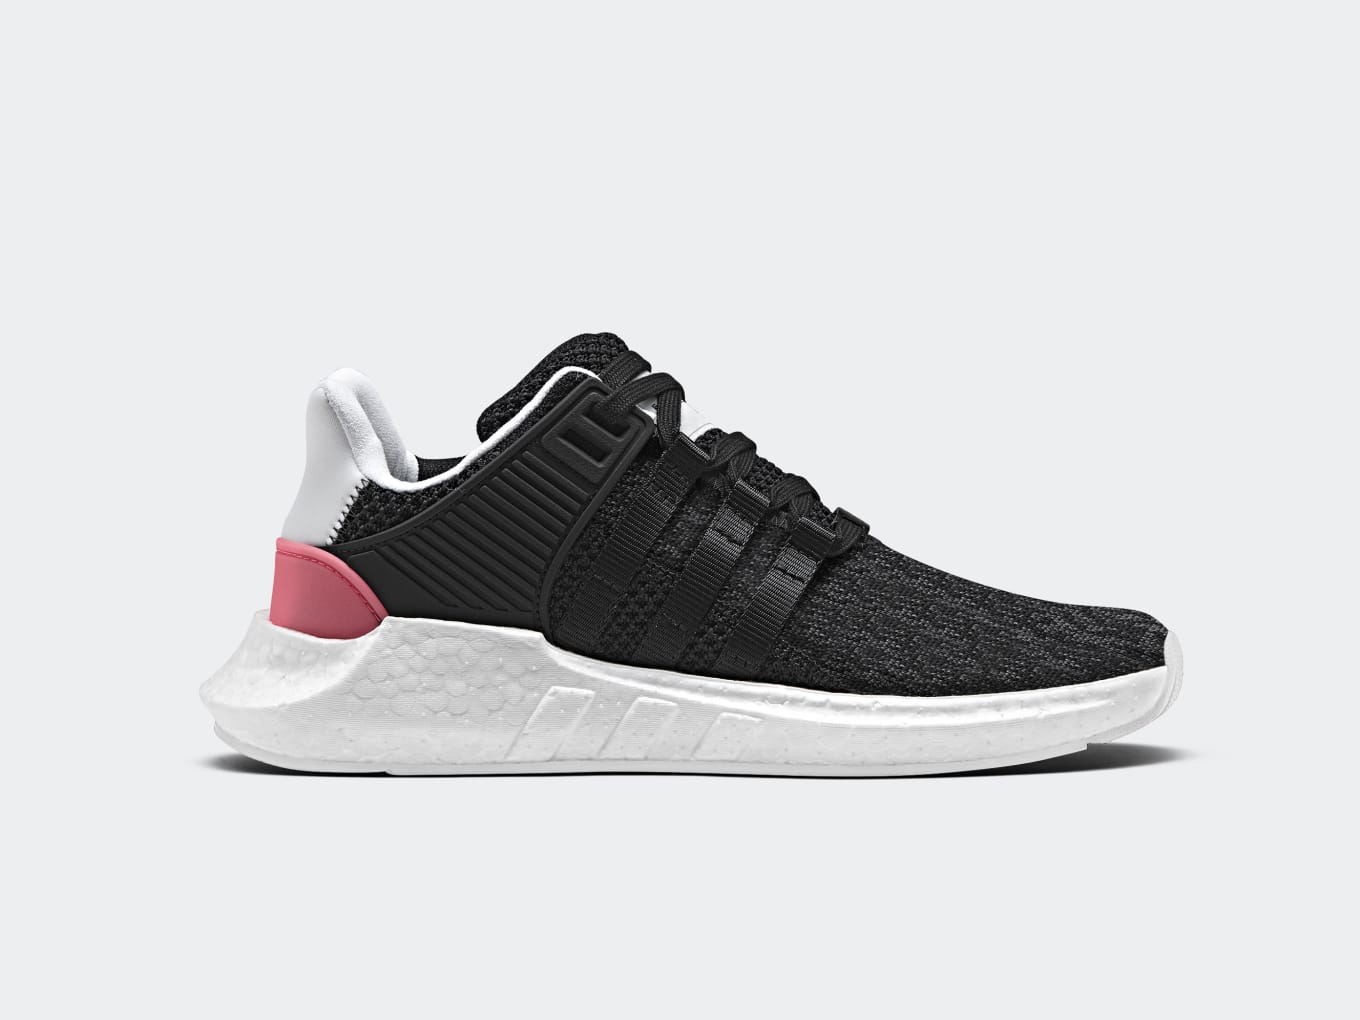 Adidas EQT Support 2017 Release Dates | Sole Collector